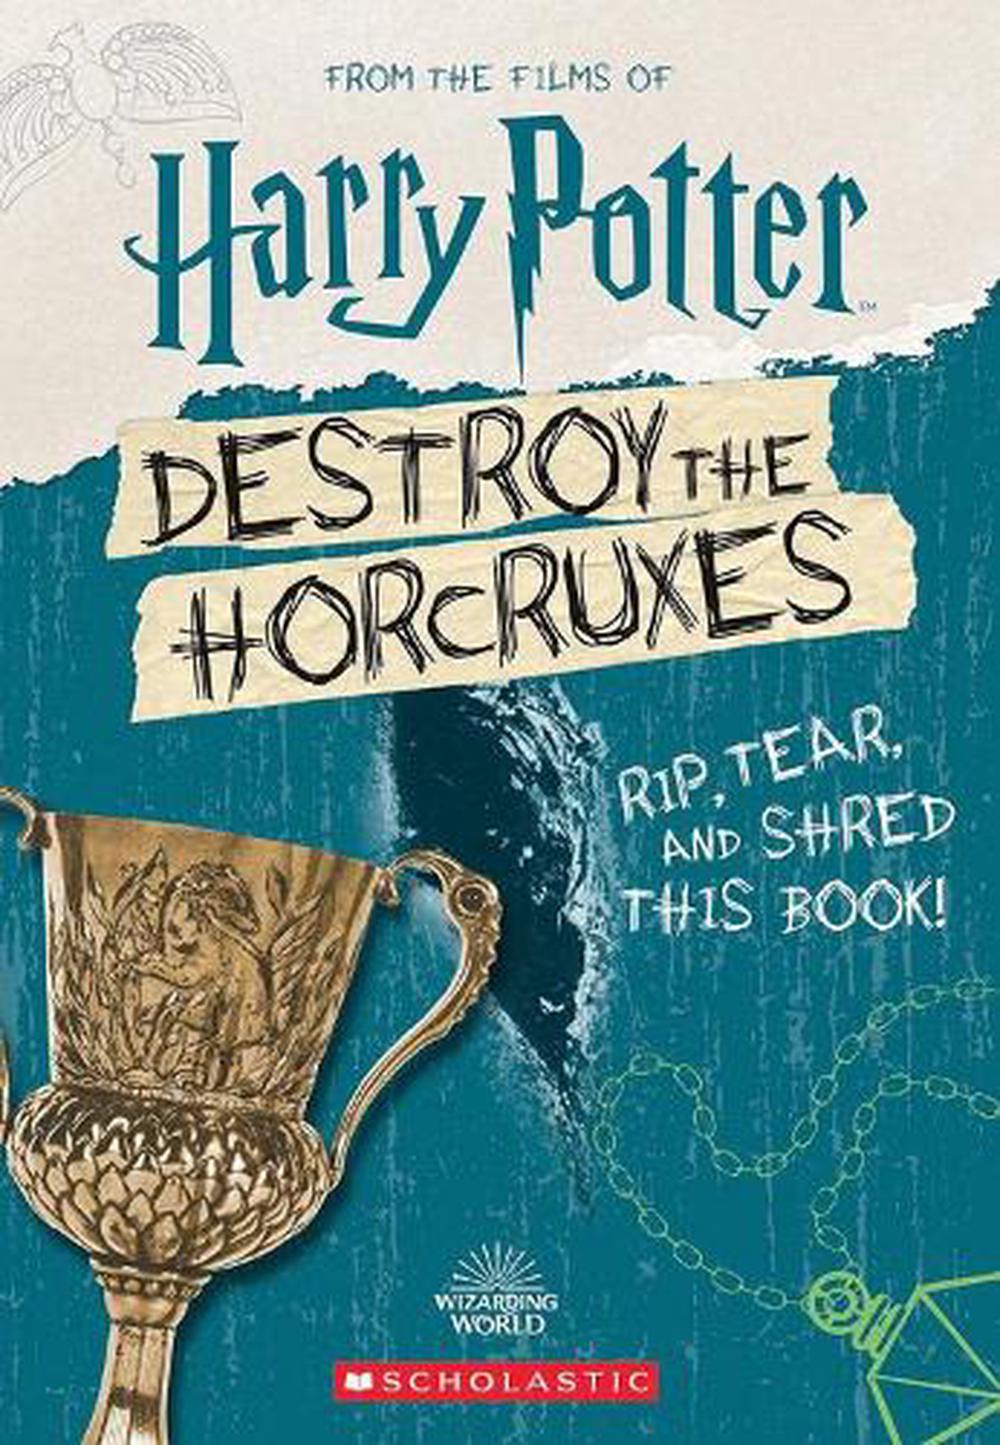 Destroy the Horcruxes (Official Harry Potter Activity Book)